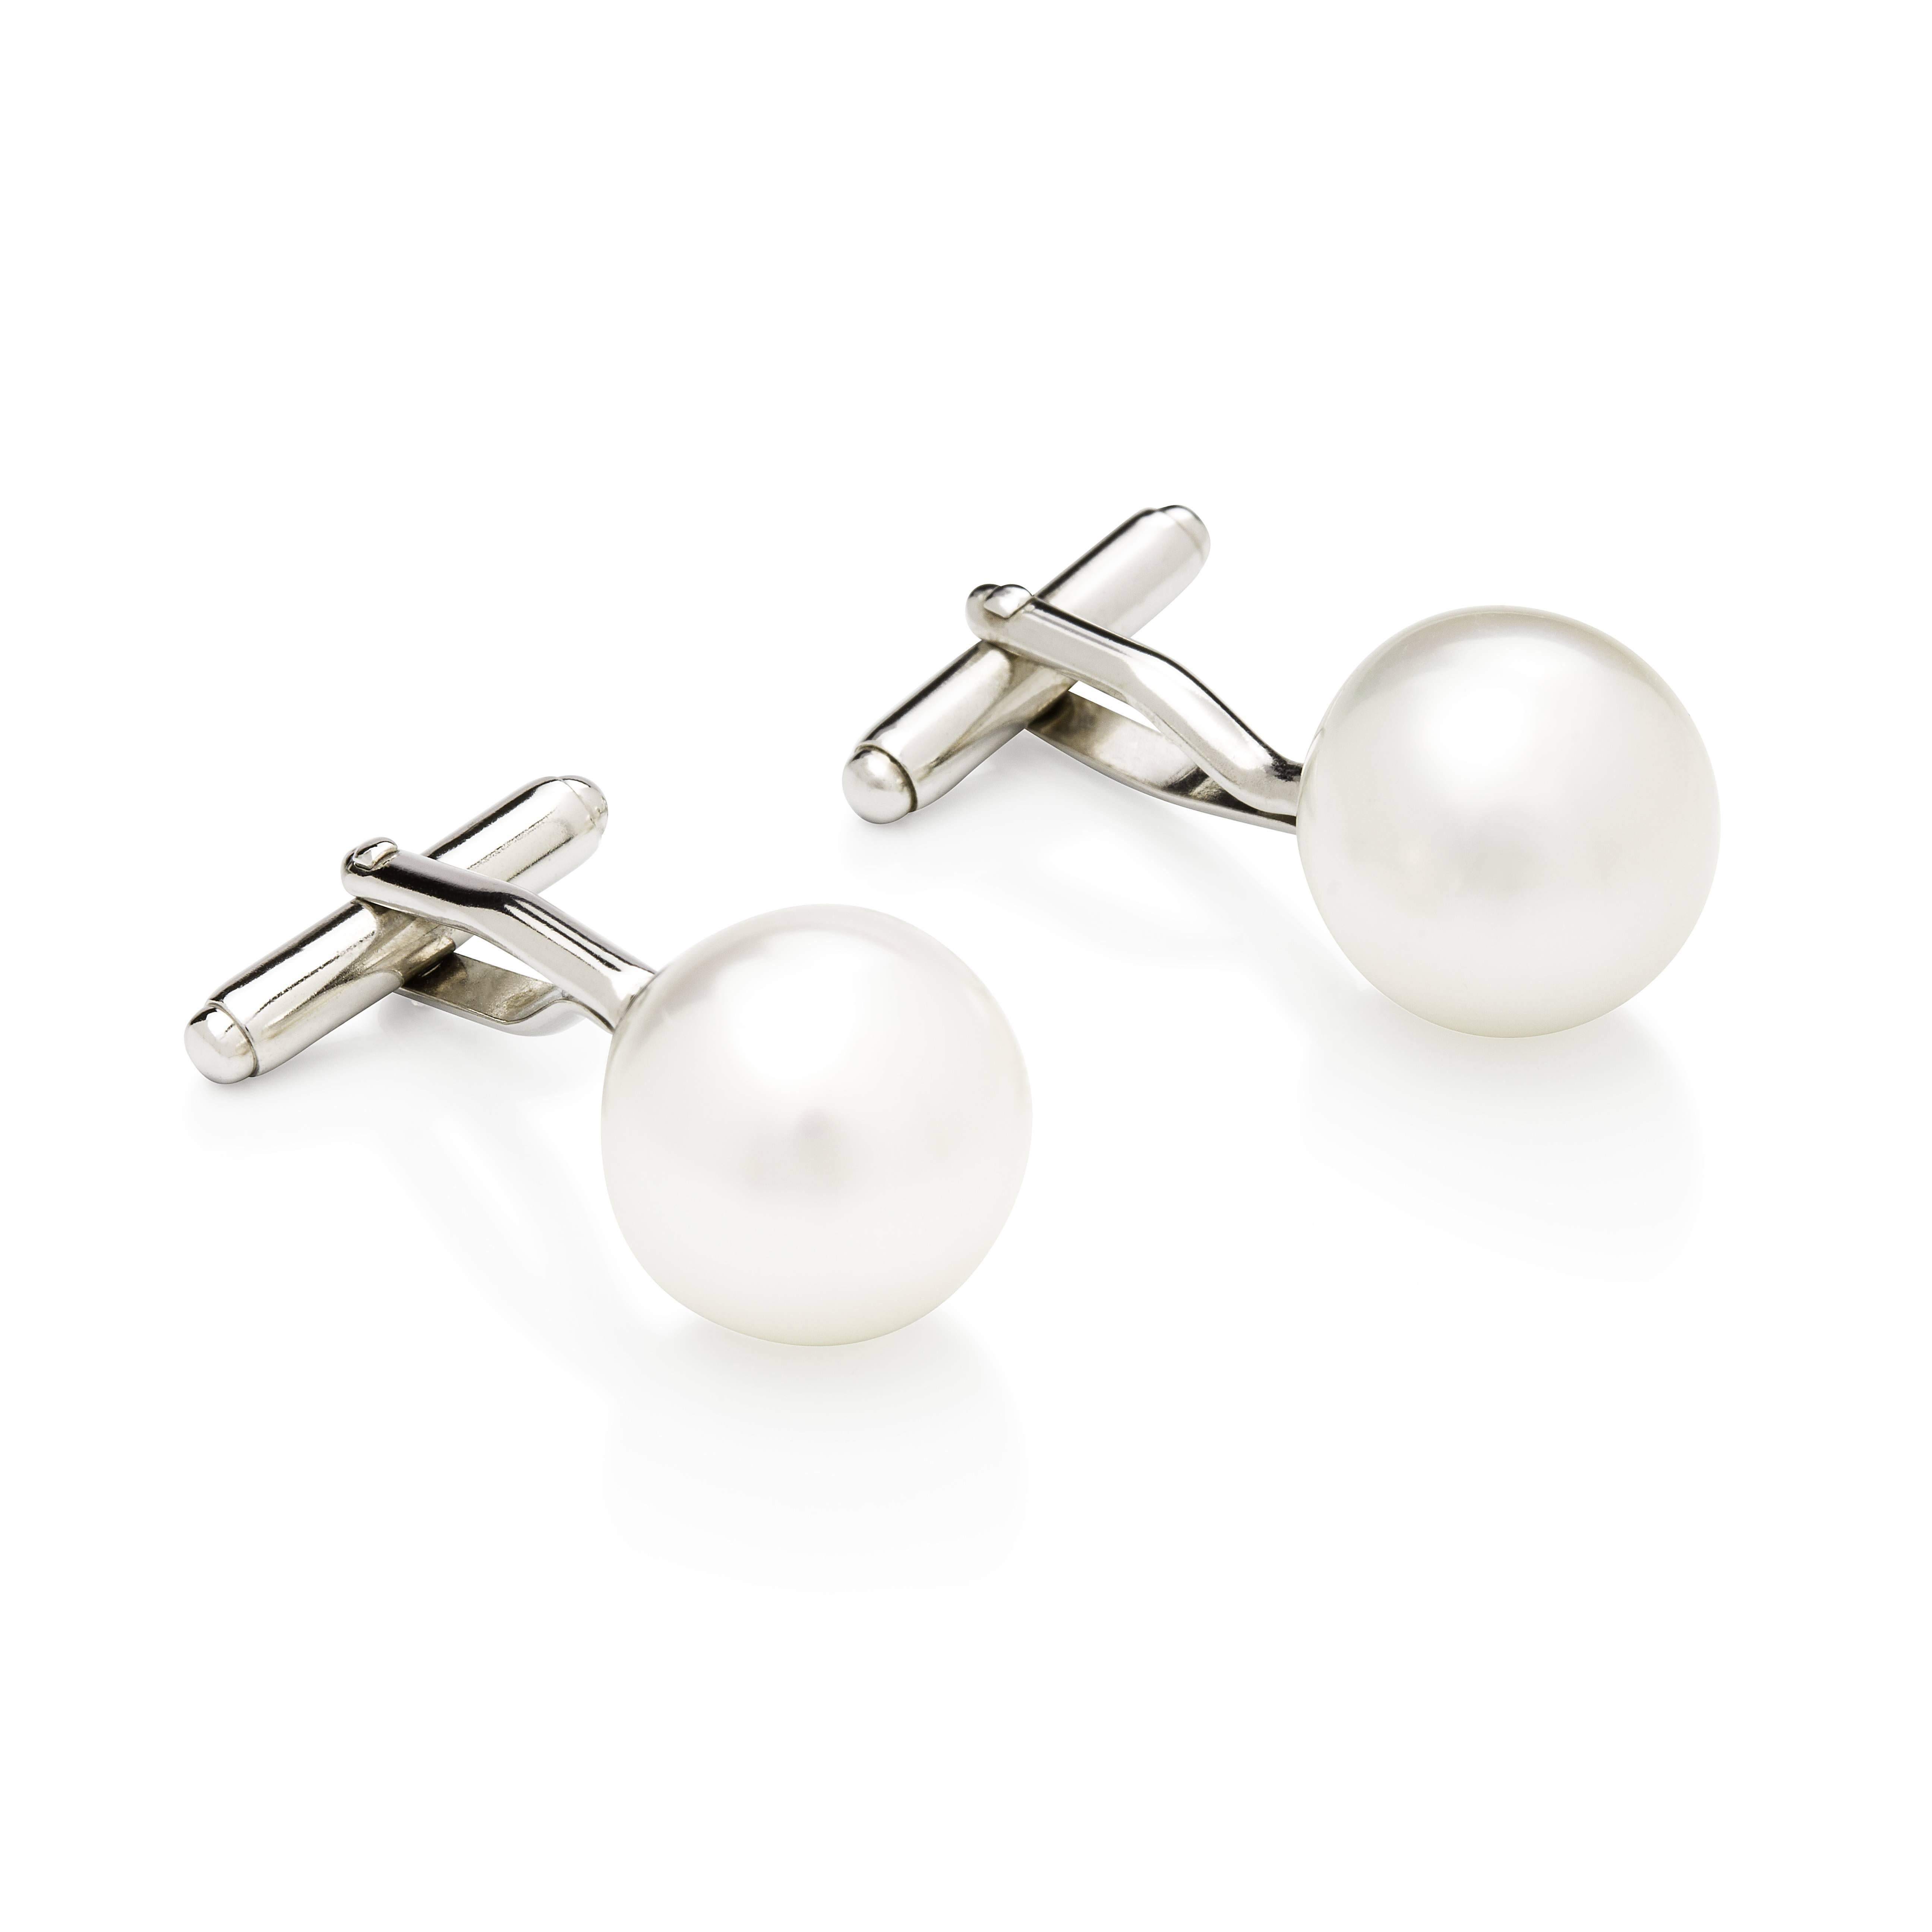 Style for Men...

18 carat white gold cuff-links with 13.2mm, high button shape, high quality (no blemishes or marks), high luster, white color, Australian South Sea pearls.

Button shaped pearls are perfect for cuff-links so they sit just right